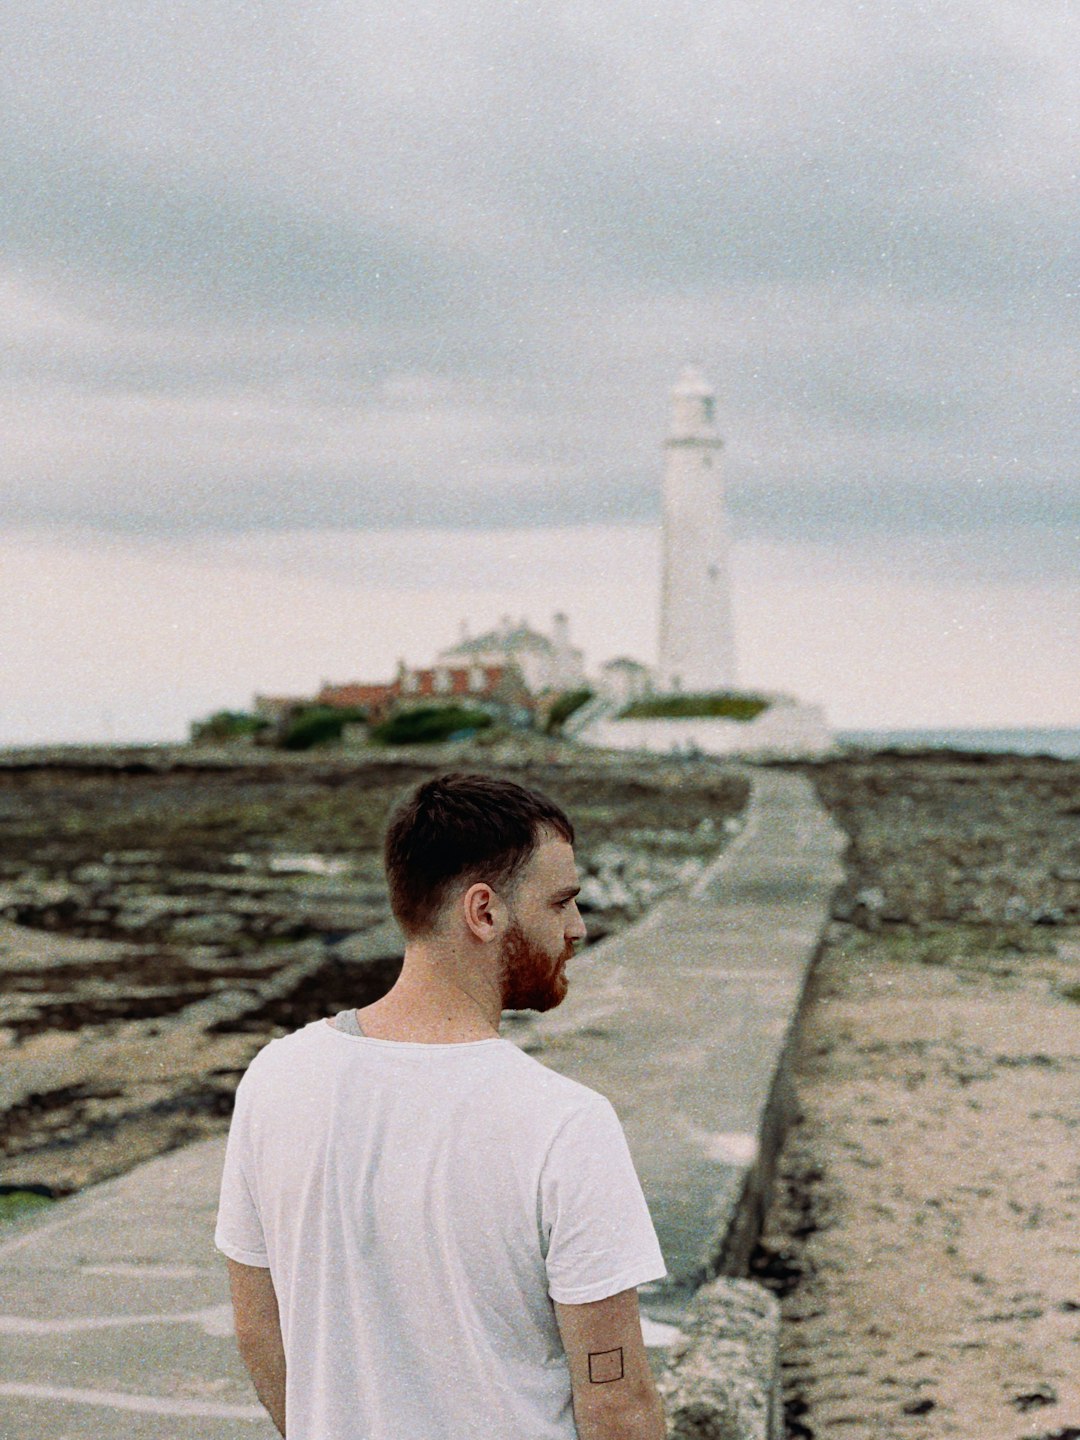 man standing on a concrete road leading to a lighthouse